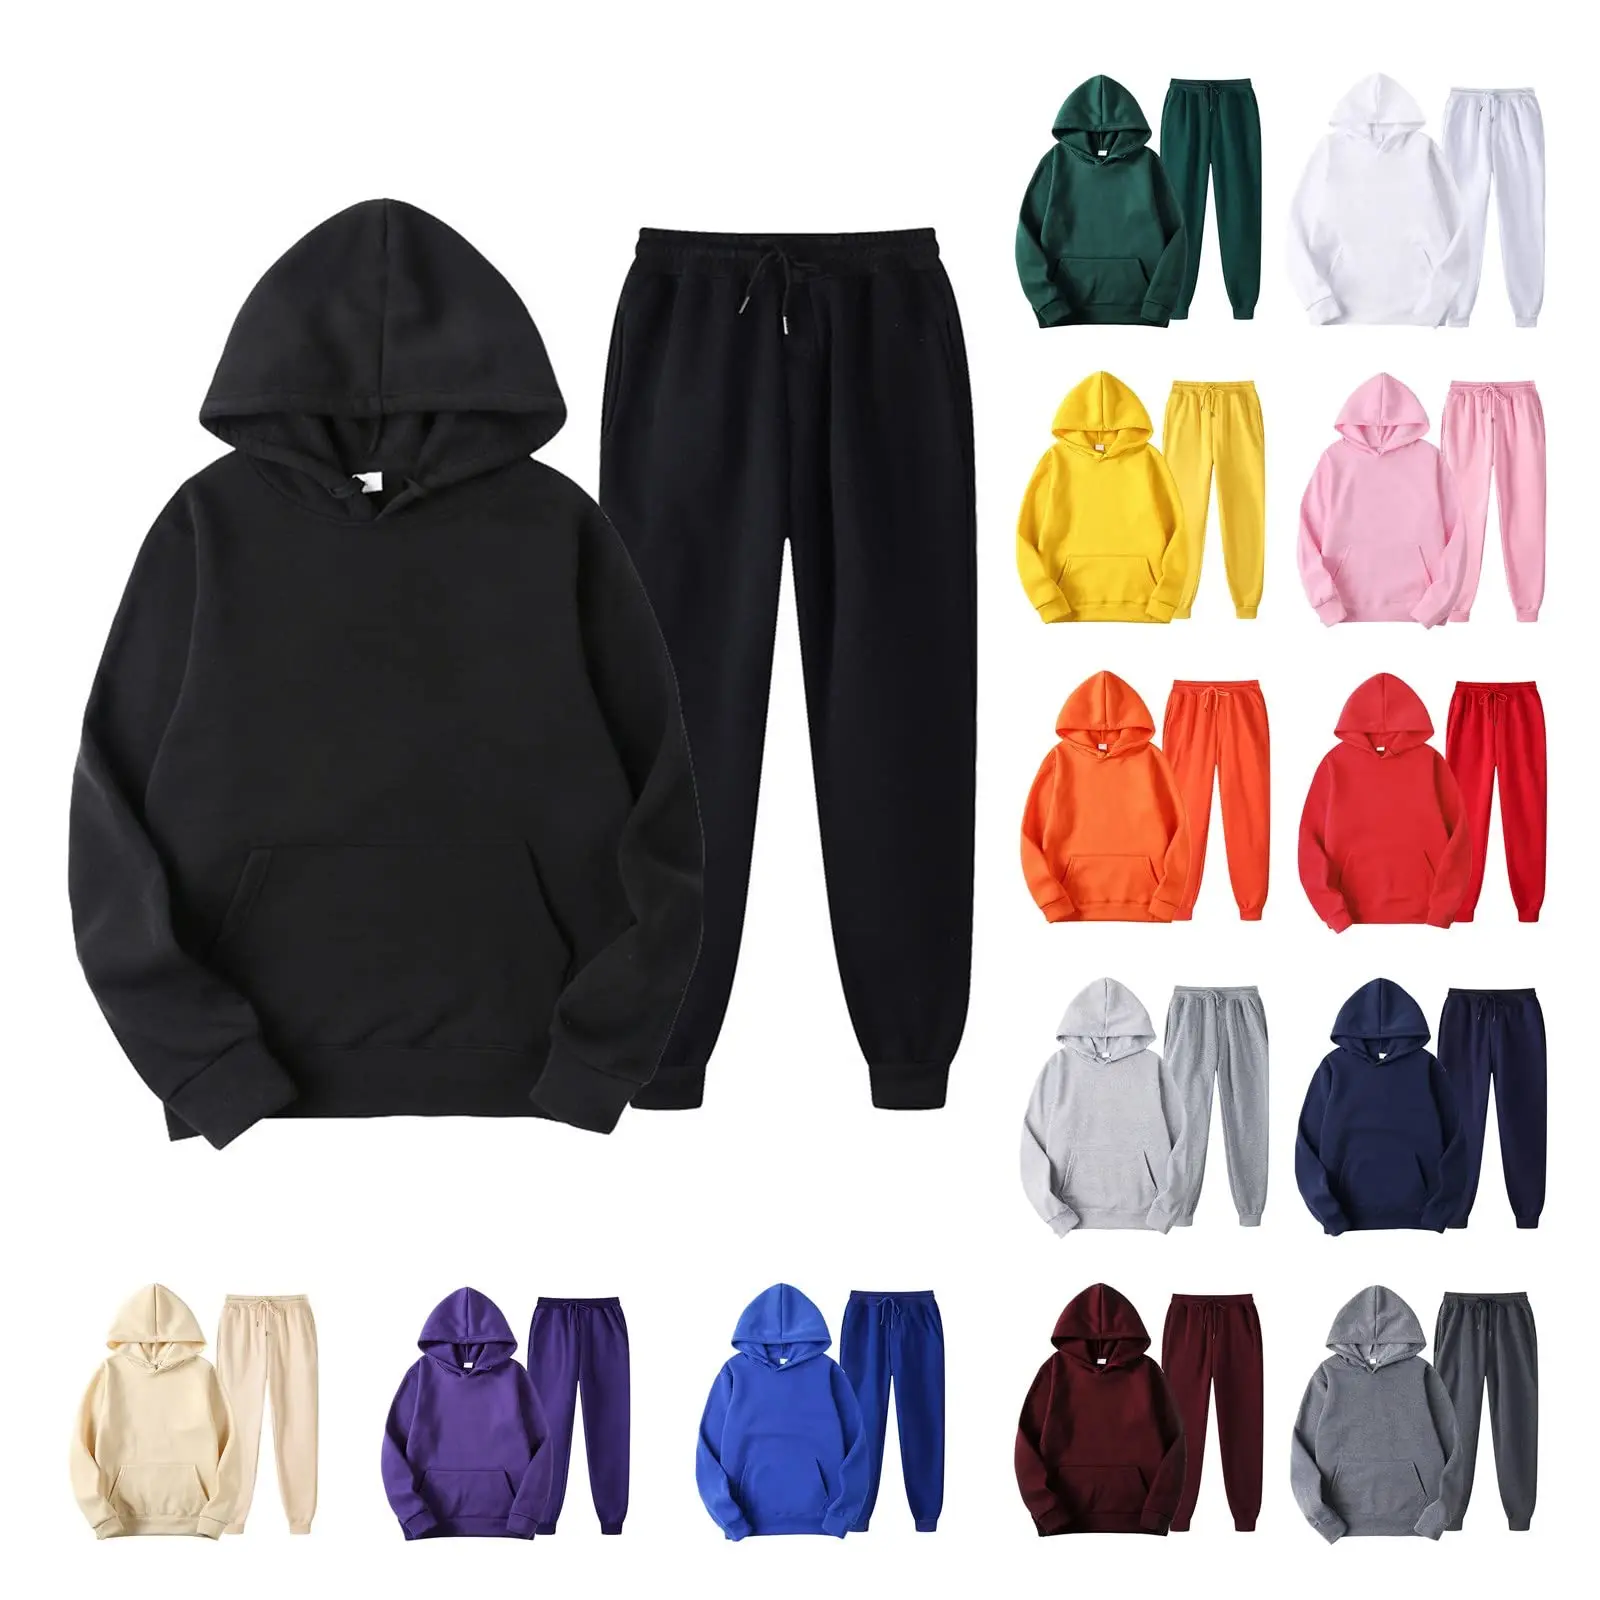 2pcs Outfits Men's Sports Tracksuits Long Sleeve Hoodies Sweatshirt And ...